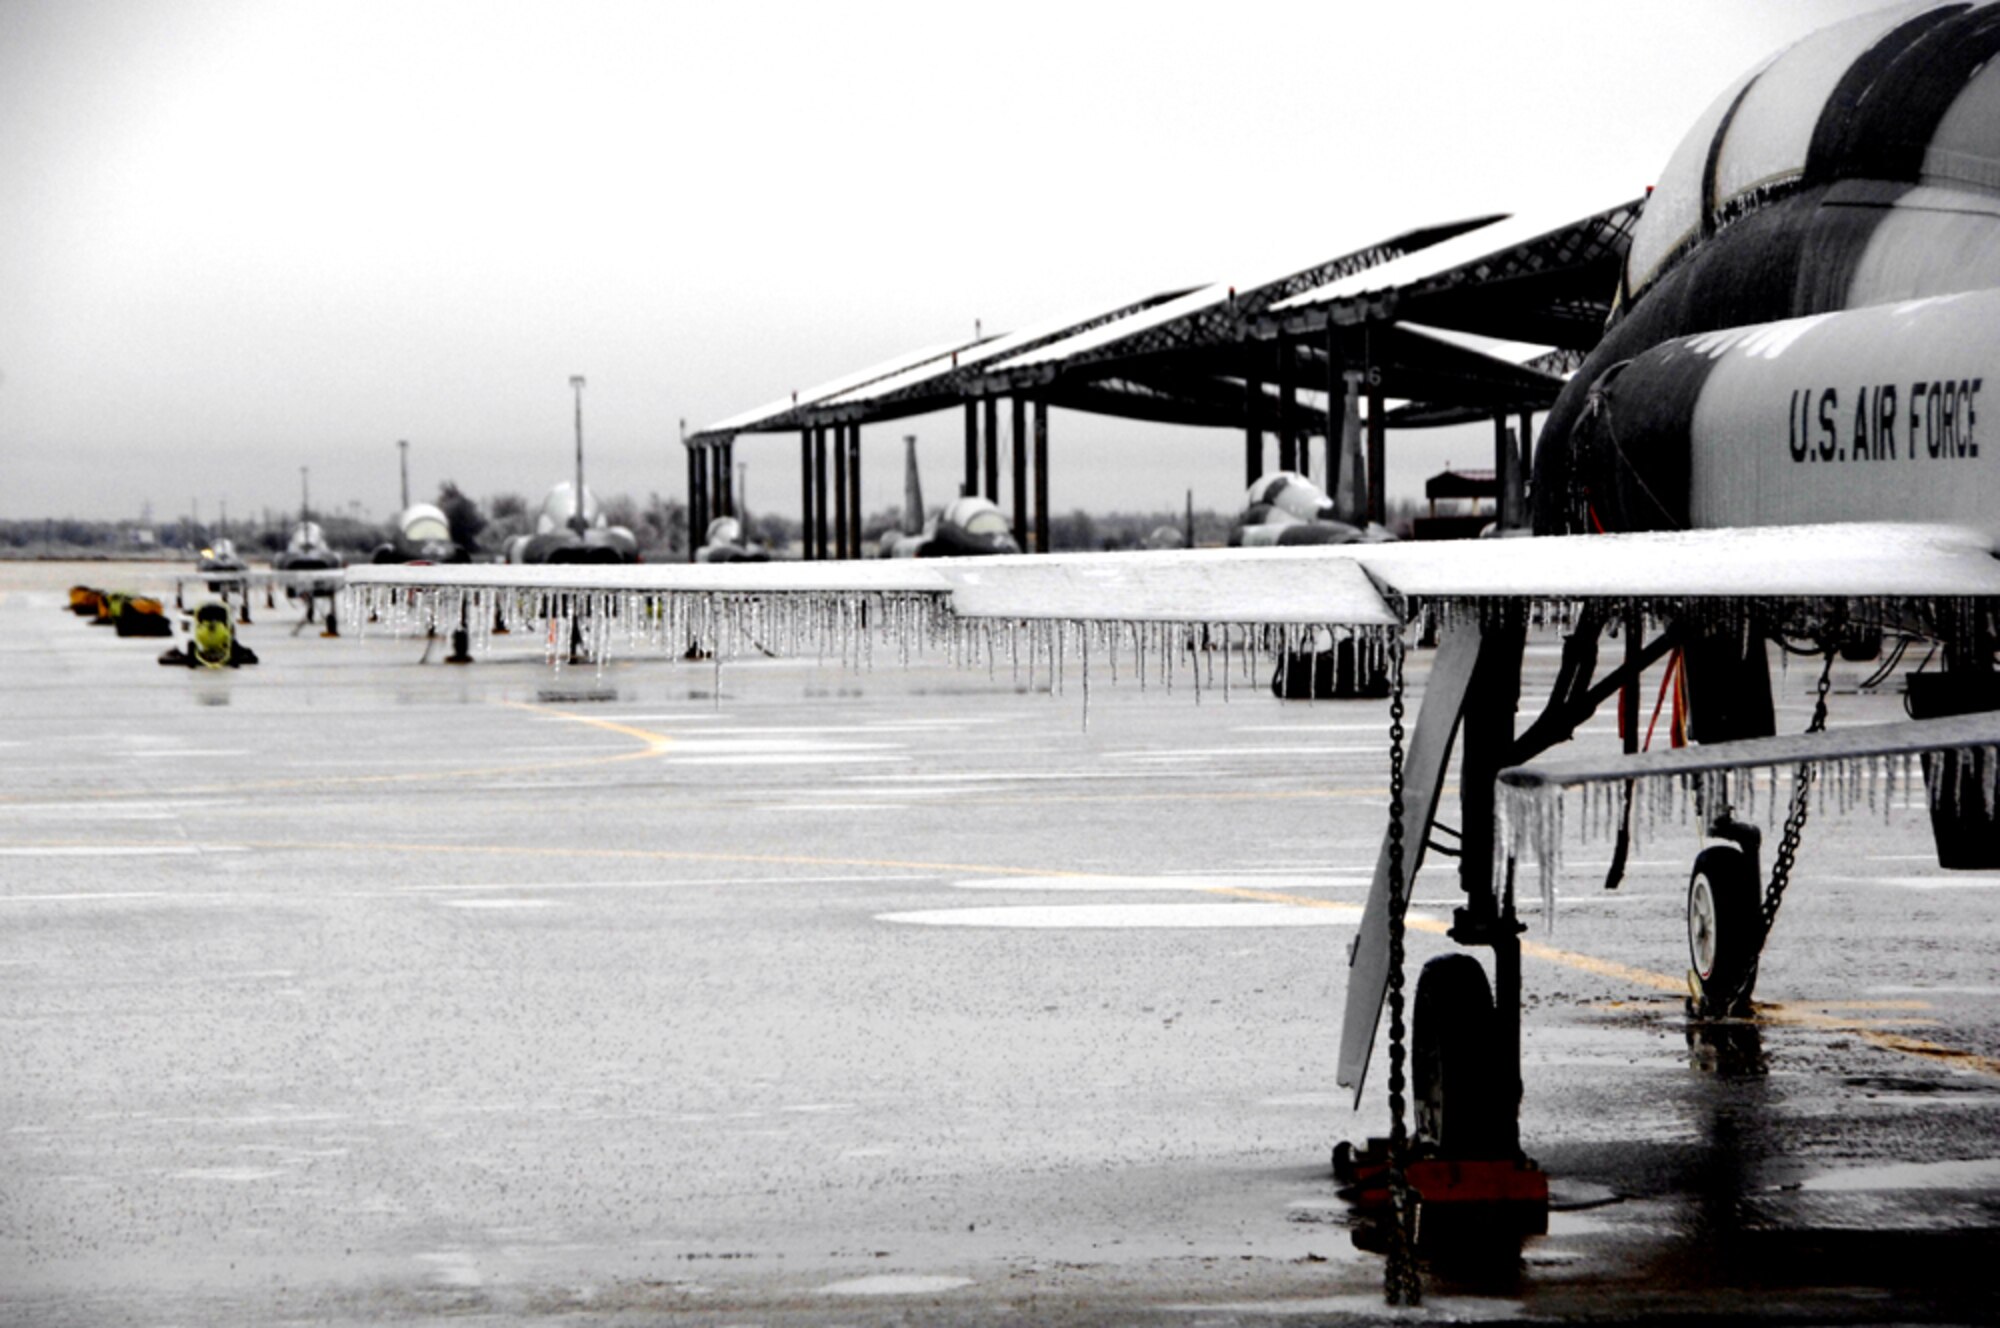 A T-38C Talon sits at Vance Air Force base as a mixture of precipitation coats surfaces across the state of Oklahoma. (U.S. Air Force photo by Terry Wasson)